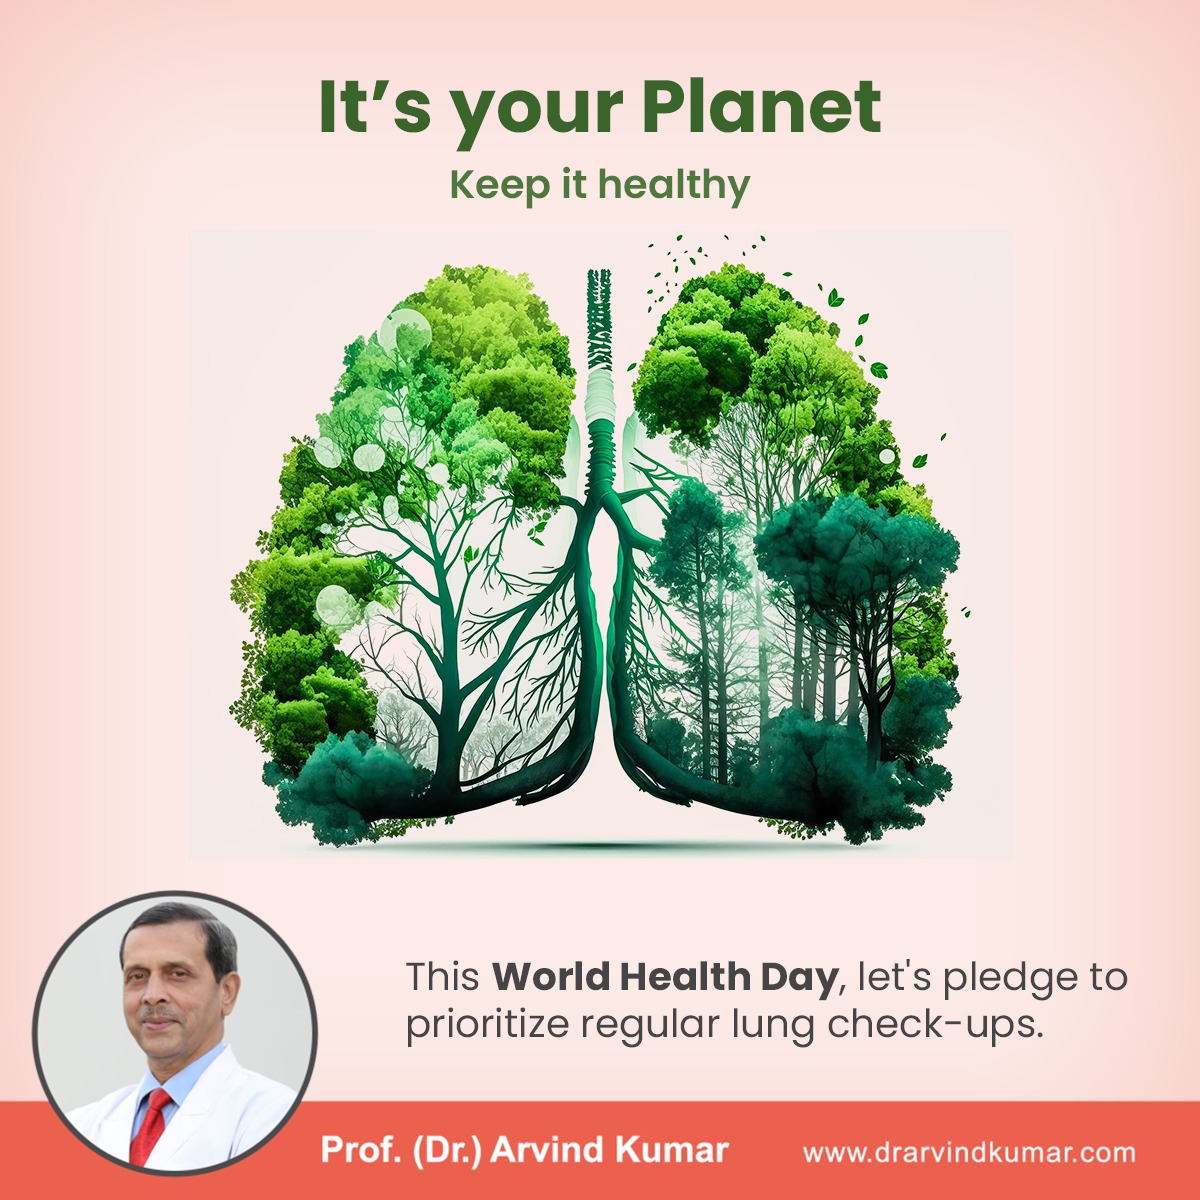 This World Health Day, make a commitment to prioritize your health. Schedule a check-up with our lung specialists and take the first step towards a healthier you. 🫁 Prioritize your health today! 💯 #WorldHealthDay #PrioritizeYourHealth #DrArvindKumar #Lungcancer